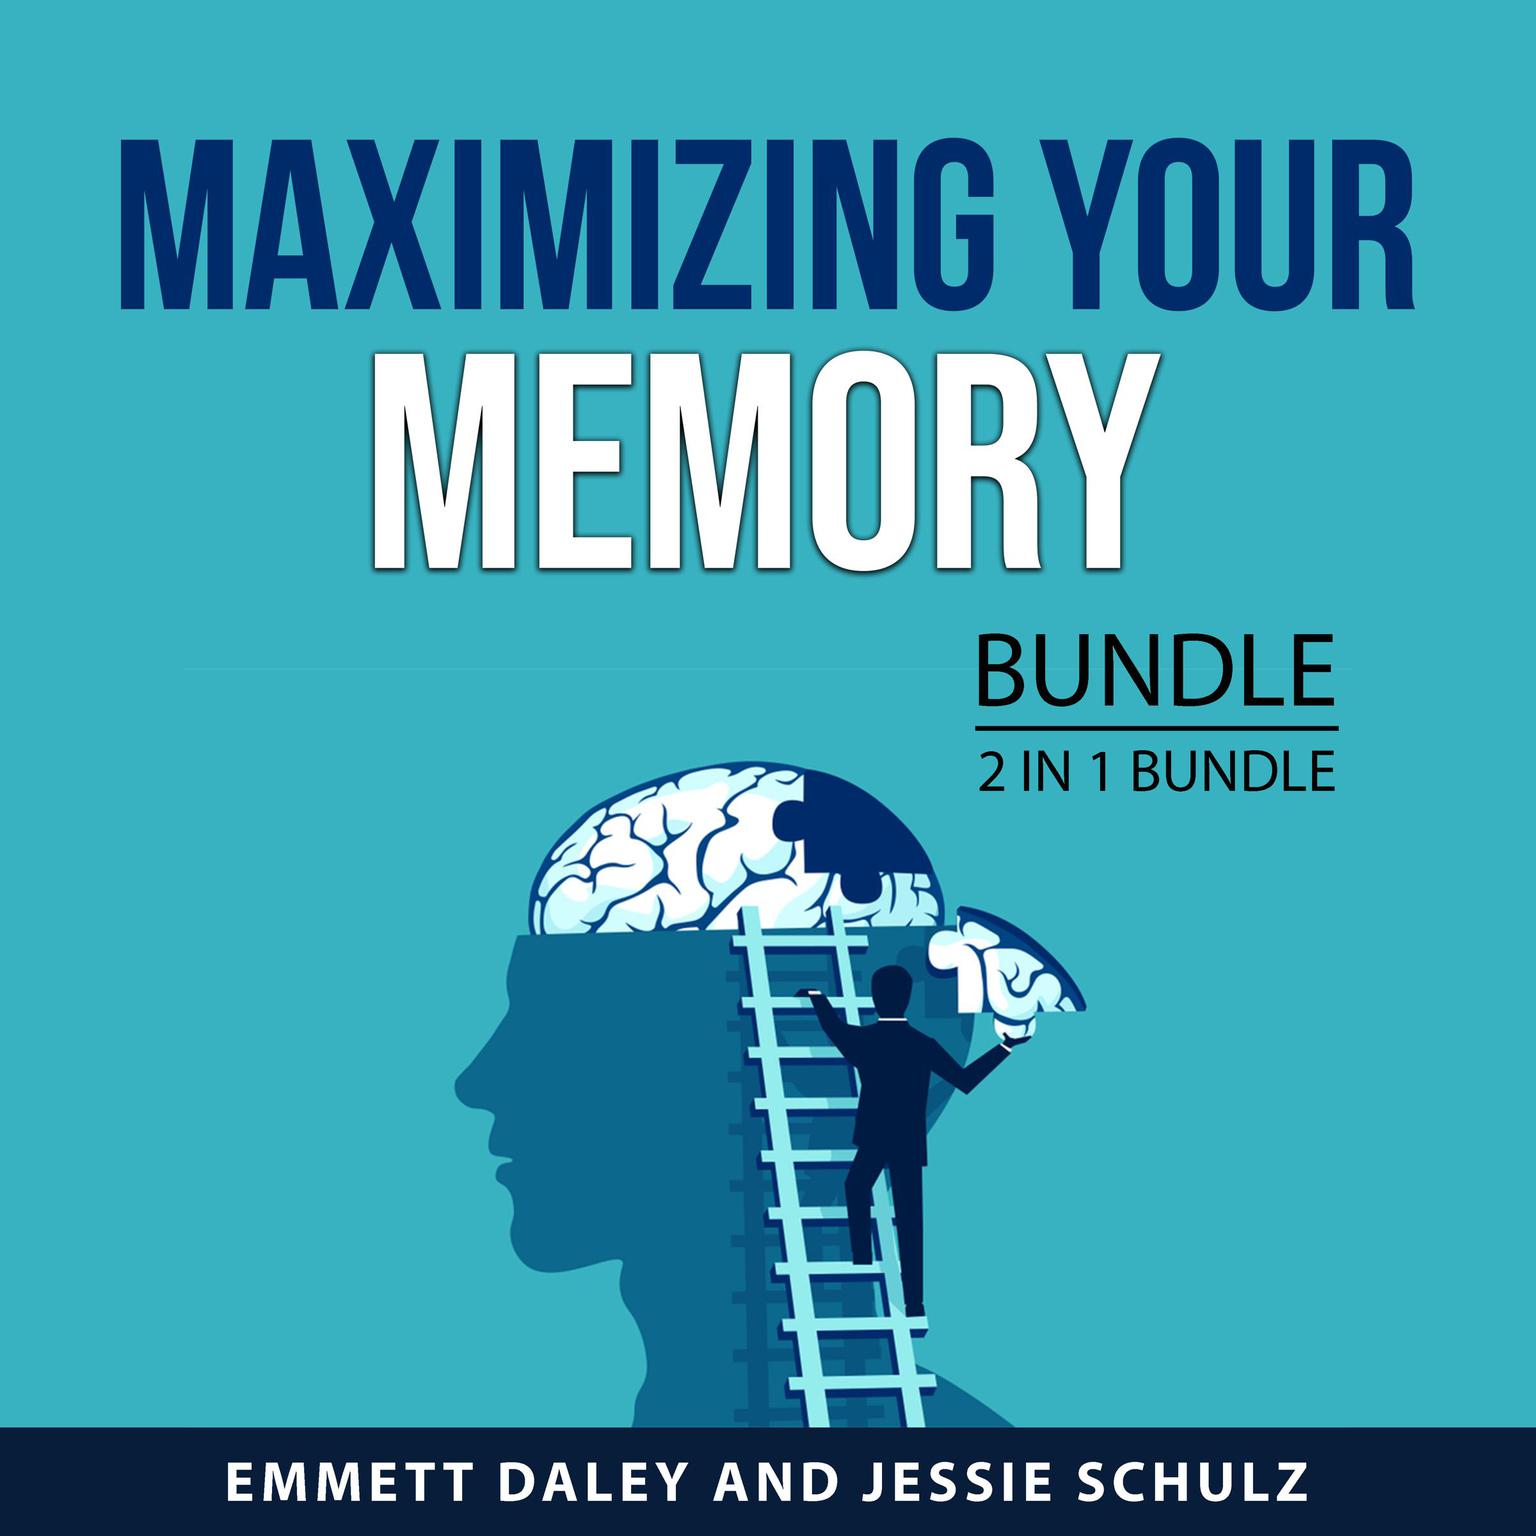 Maximizing Your Memory Bundle, 2 in 1 Bundle Audiobook, by Emmett Daley